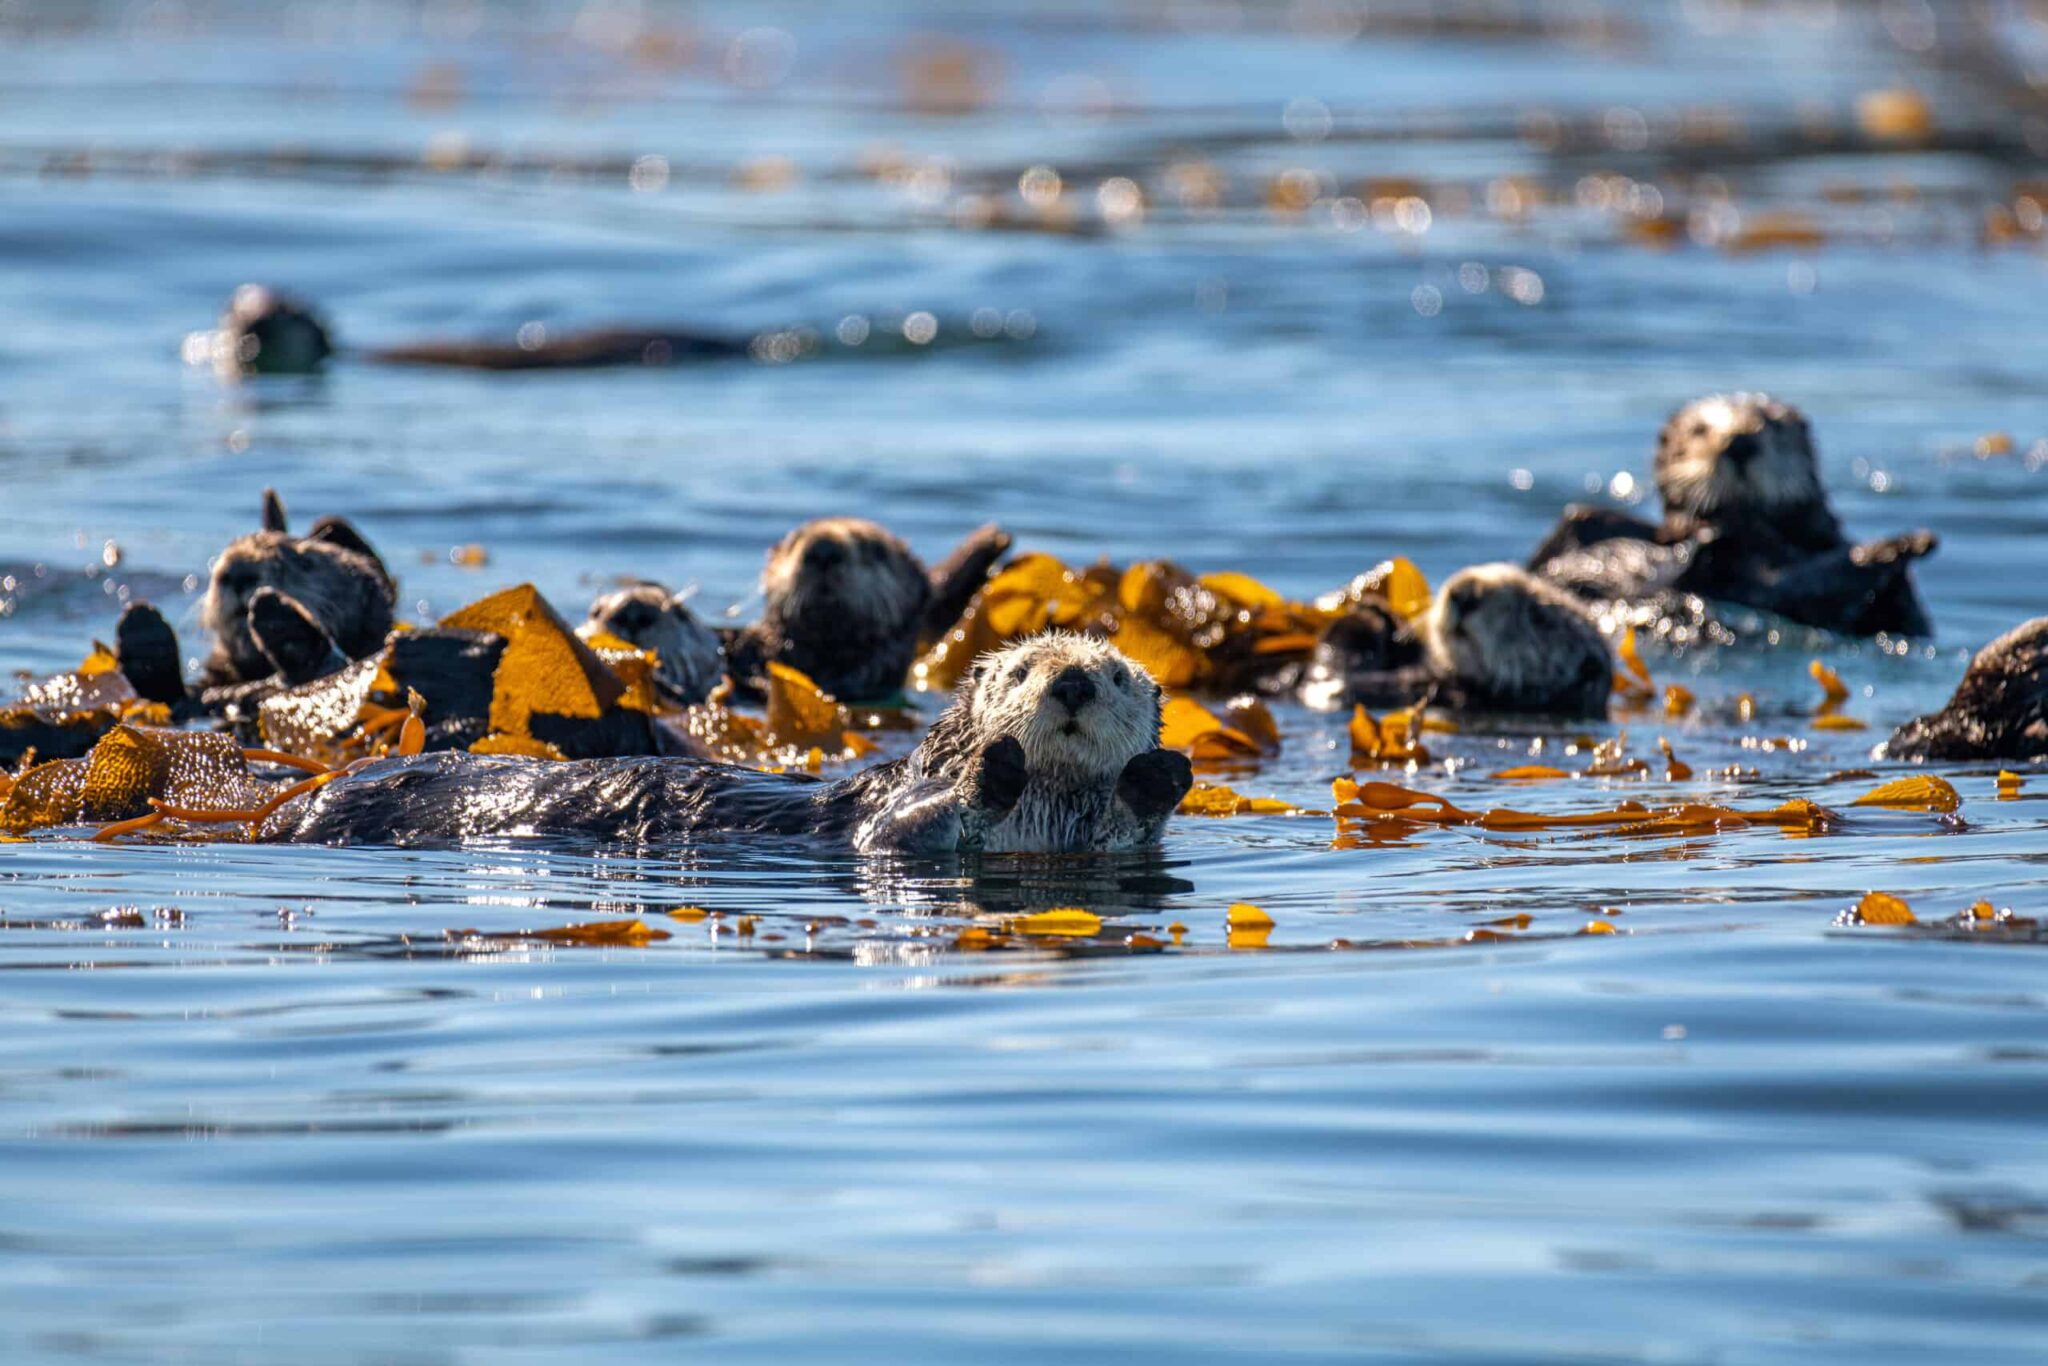 Sea otters helped restore California kelp forests - The Wildlife Society